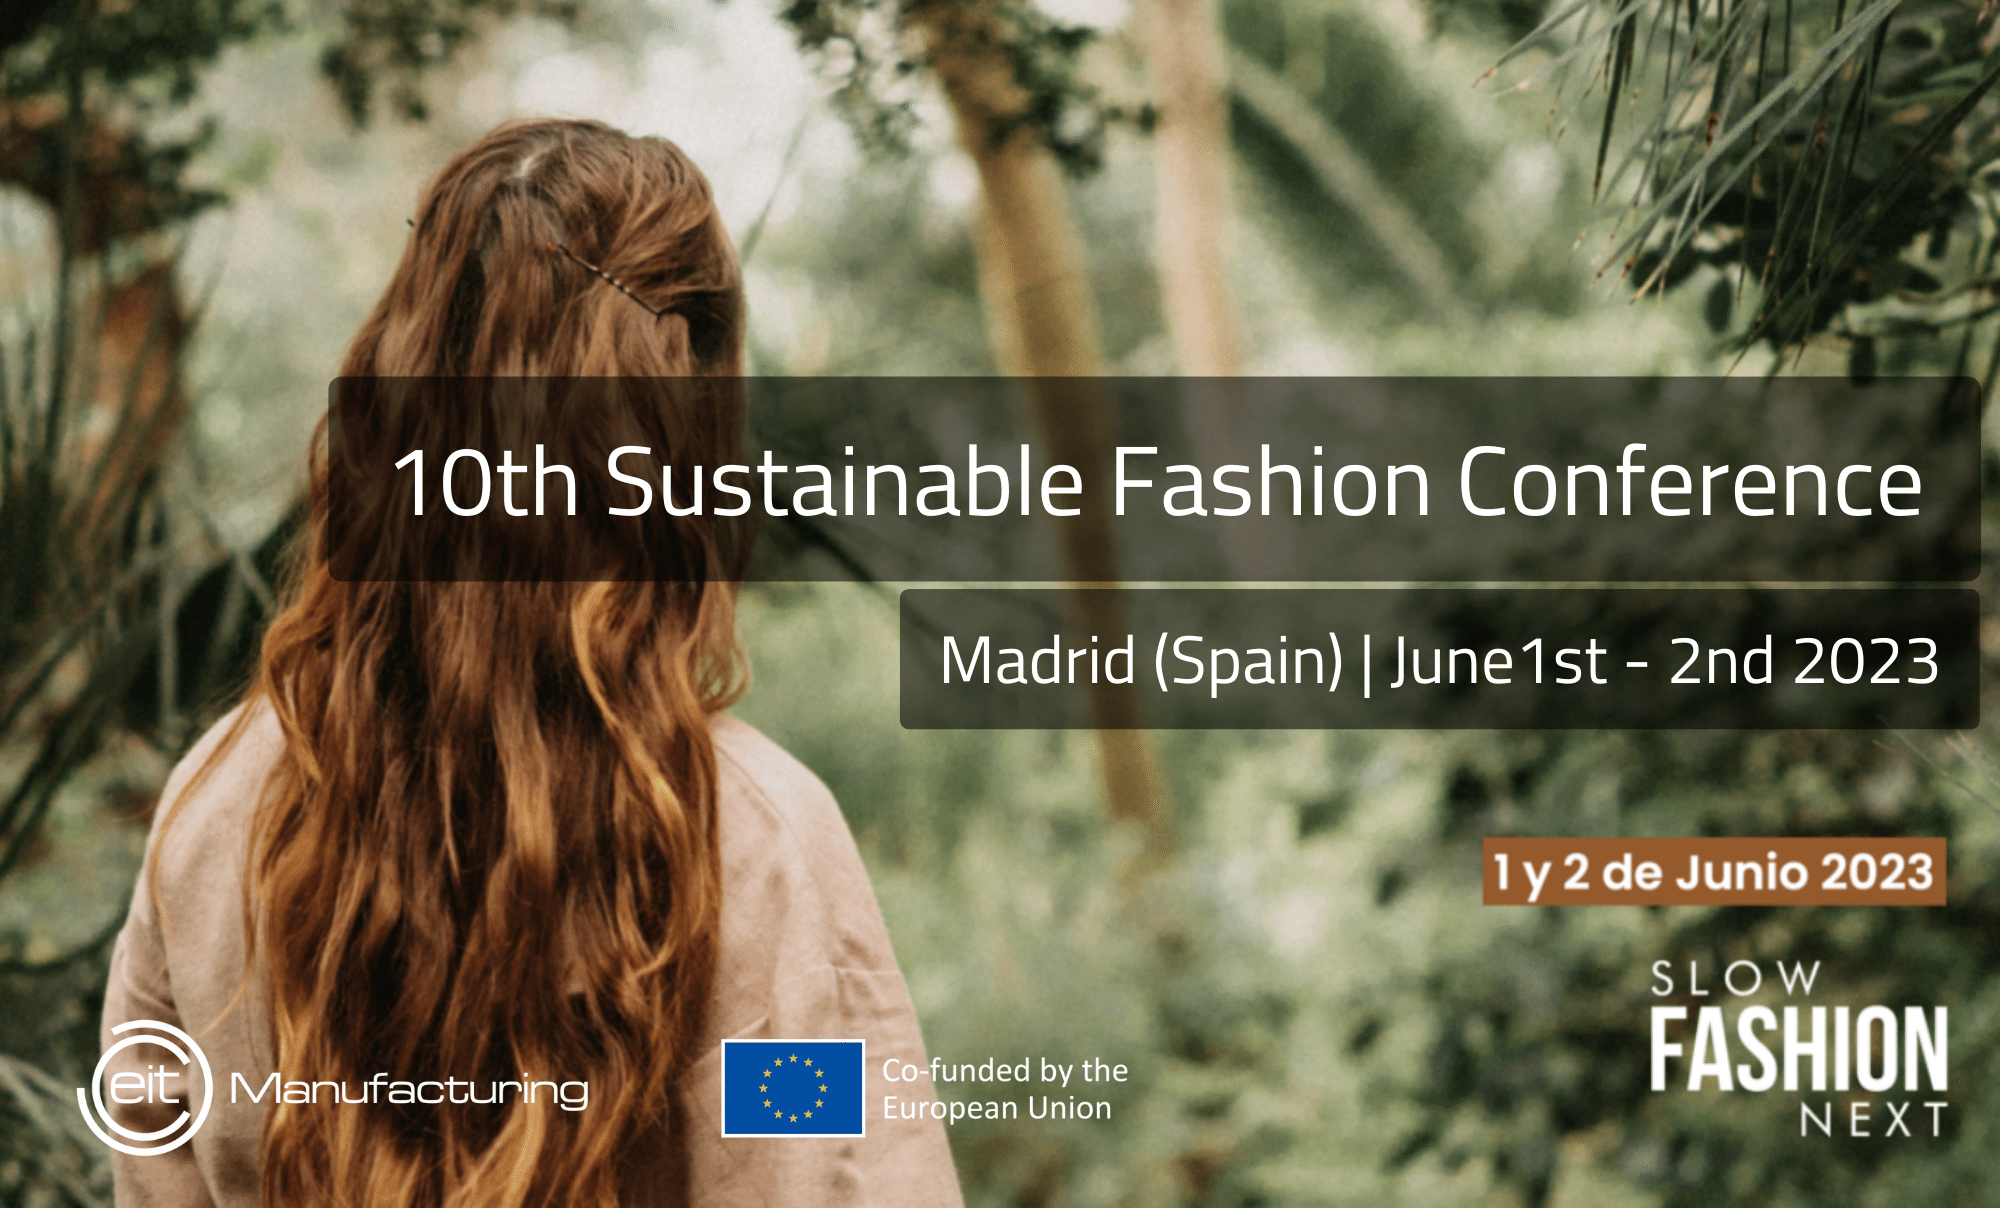 Sustainable Fashion Conference 2023 EIT Manufacturing